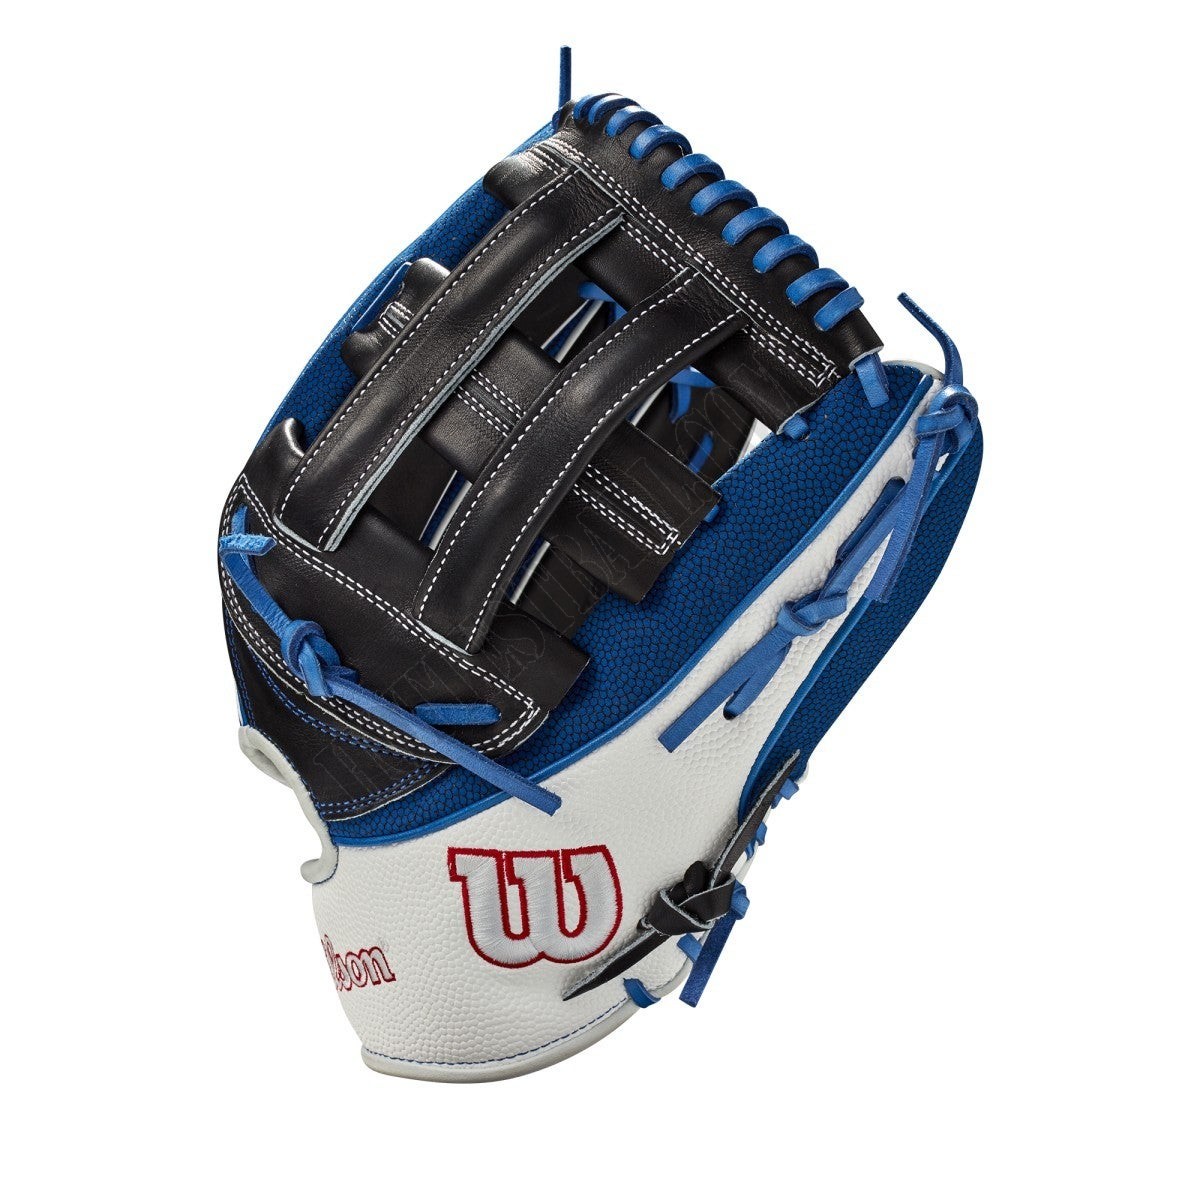 2021 A2K MB50 GM 12.5" Baseball Outfield Glove ● Wilson Promotions - -3